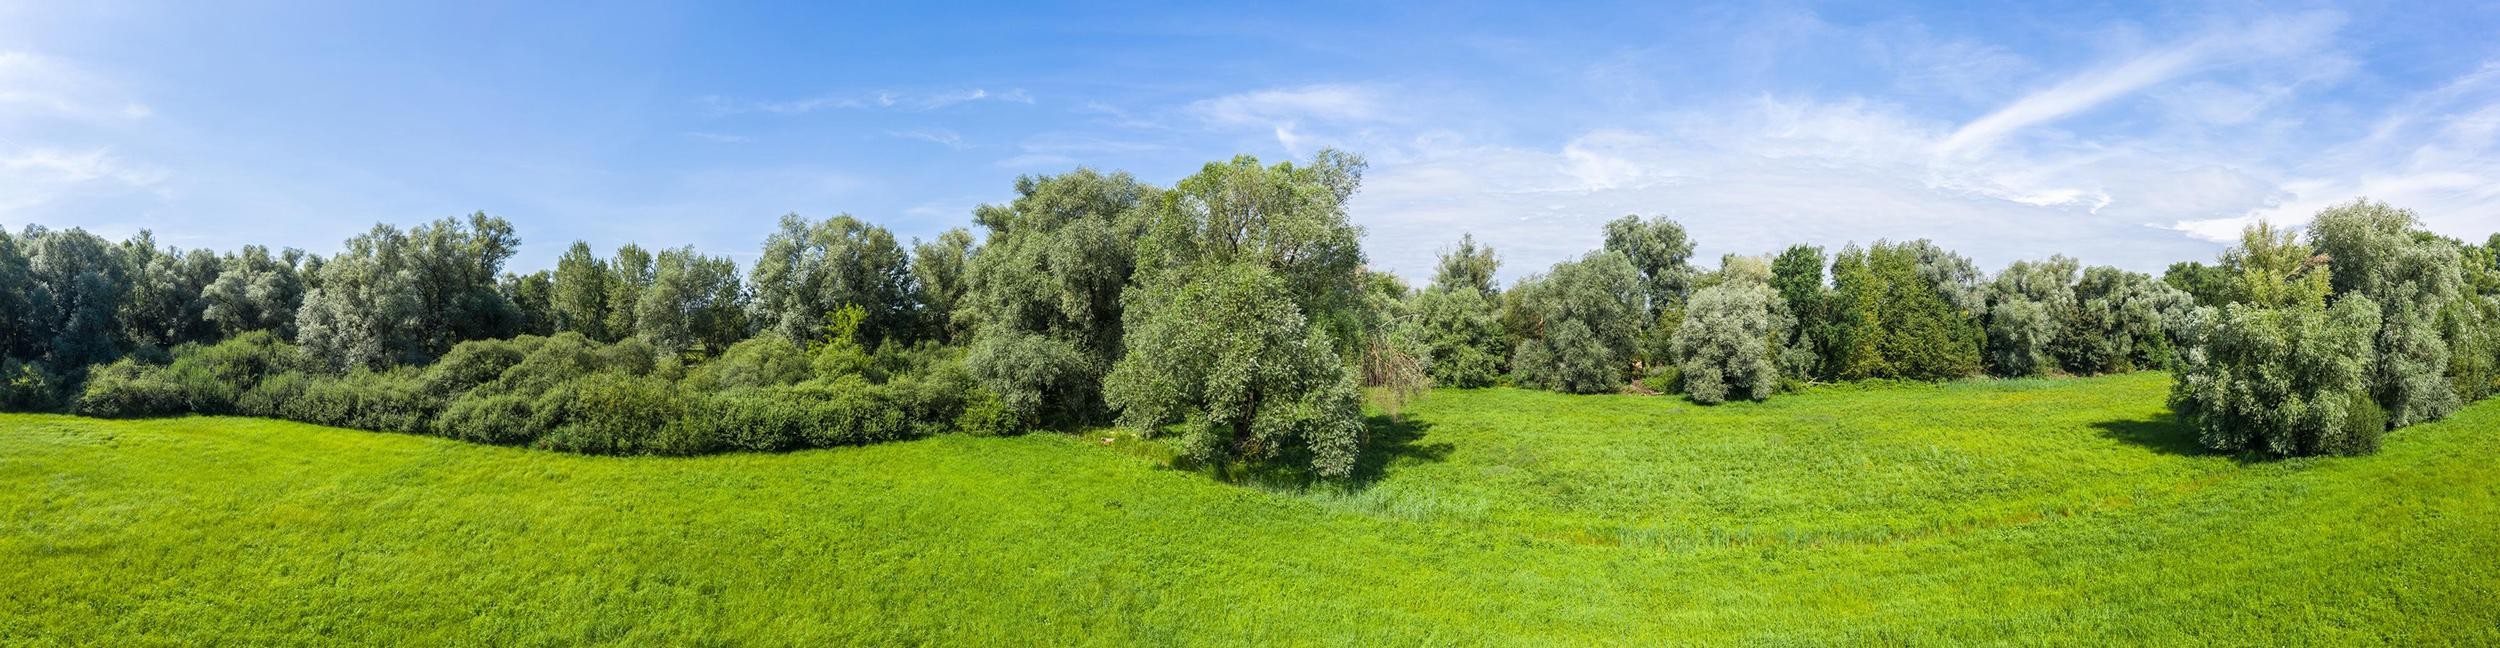 Green field and trees in Rastatter Bruch